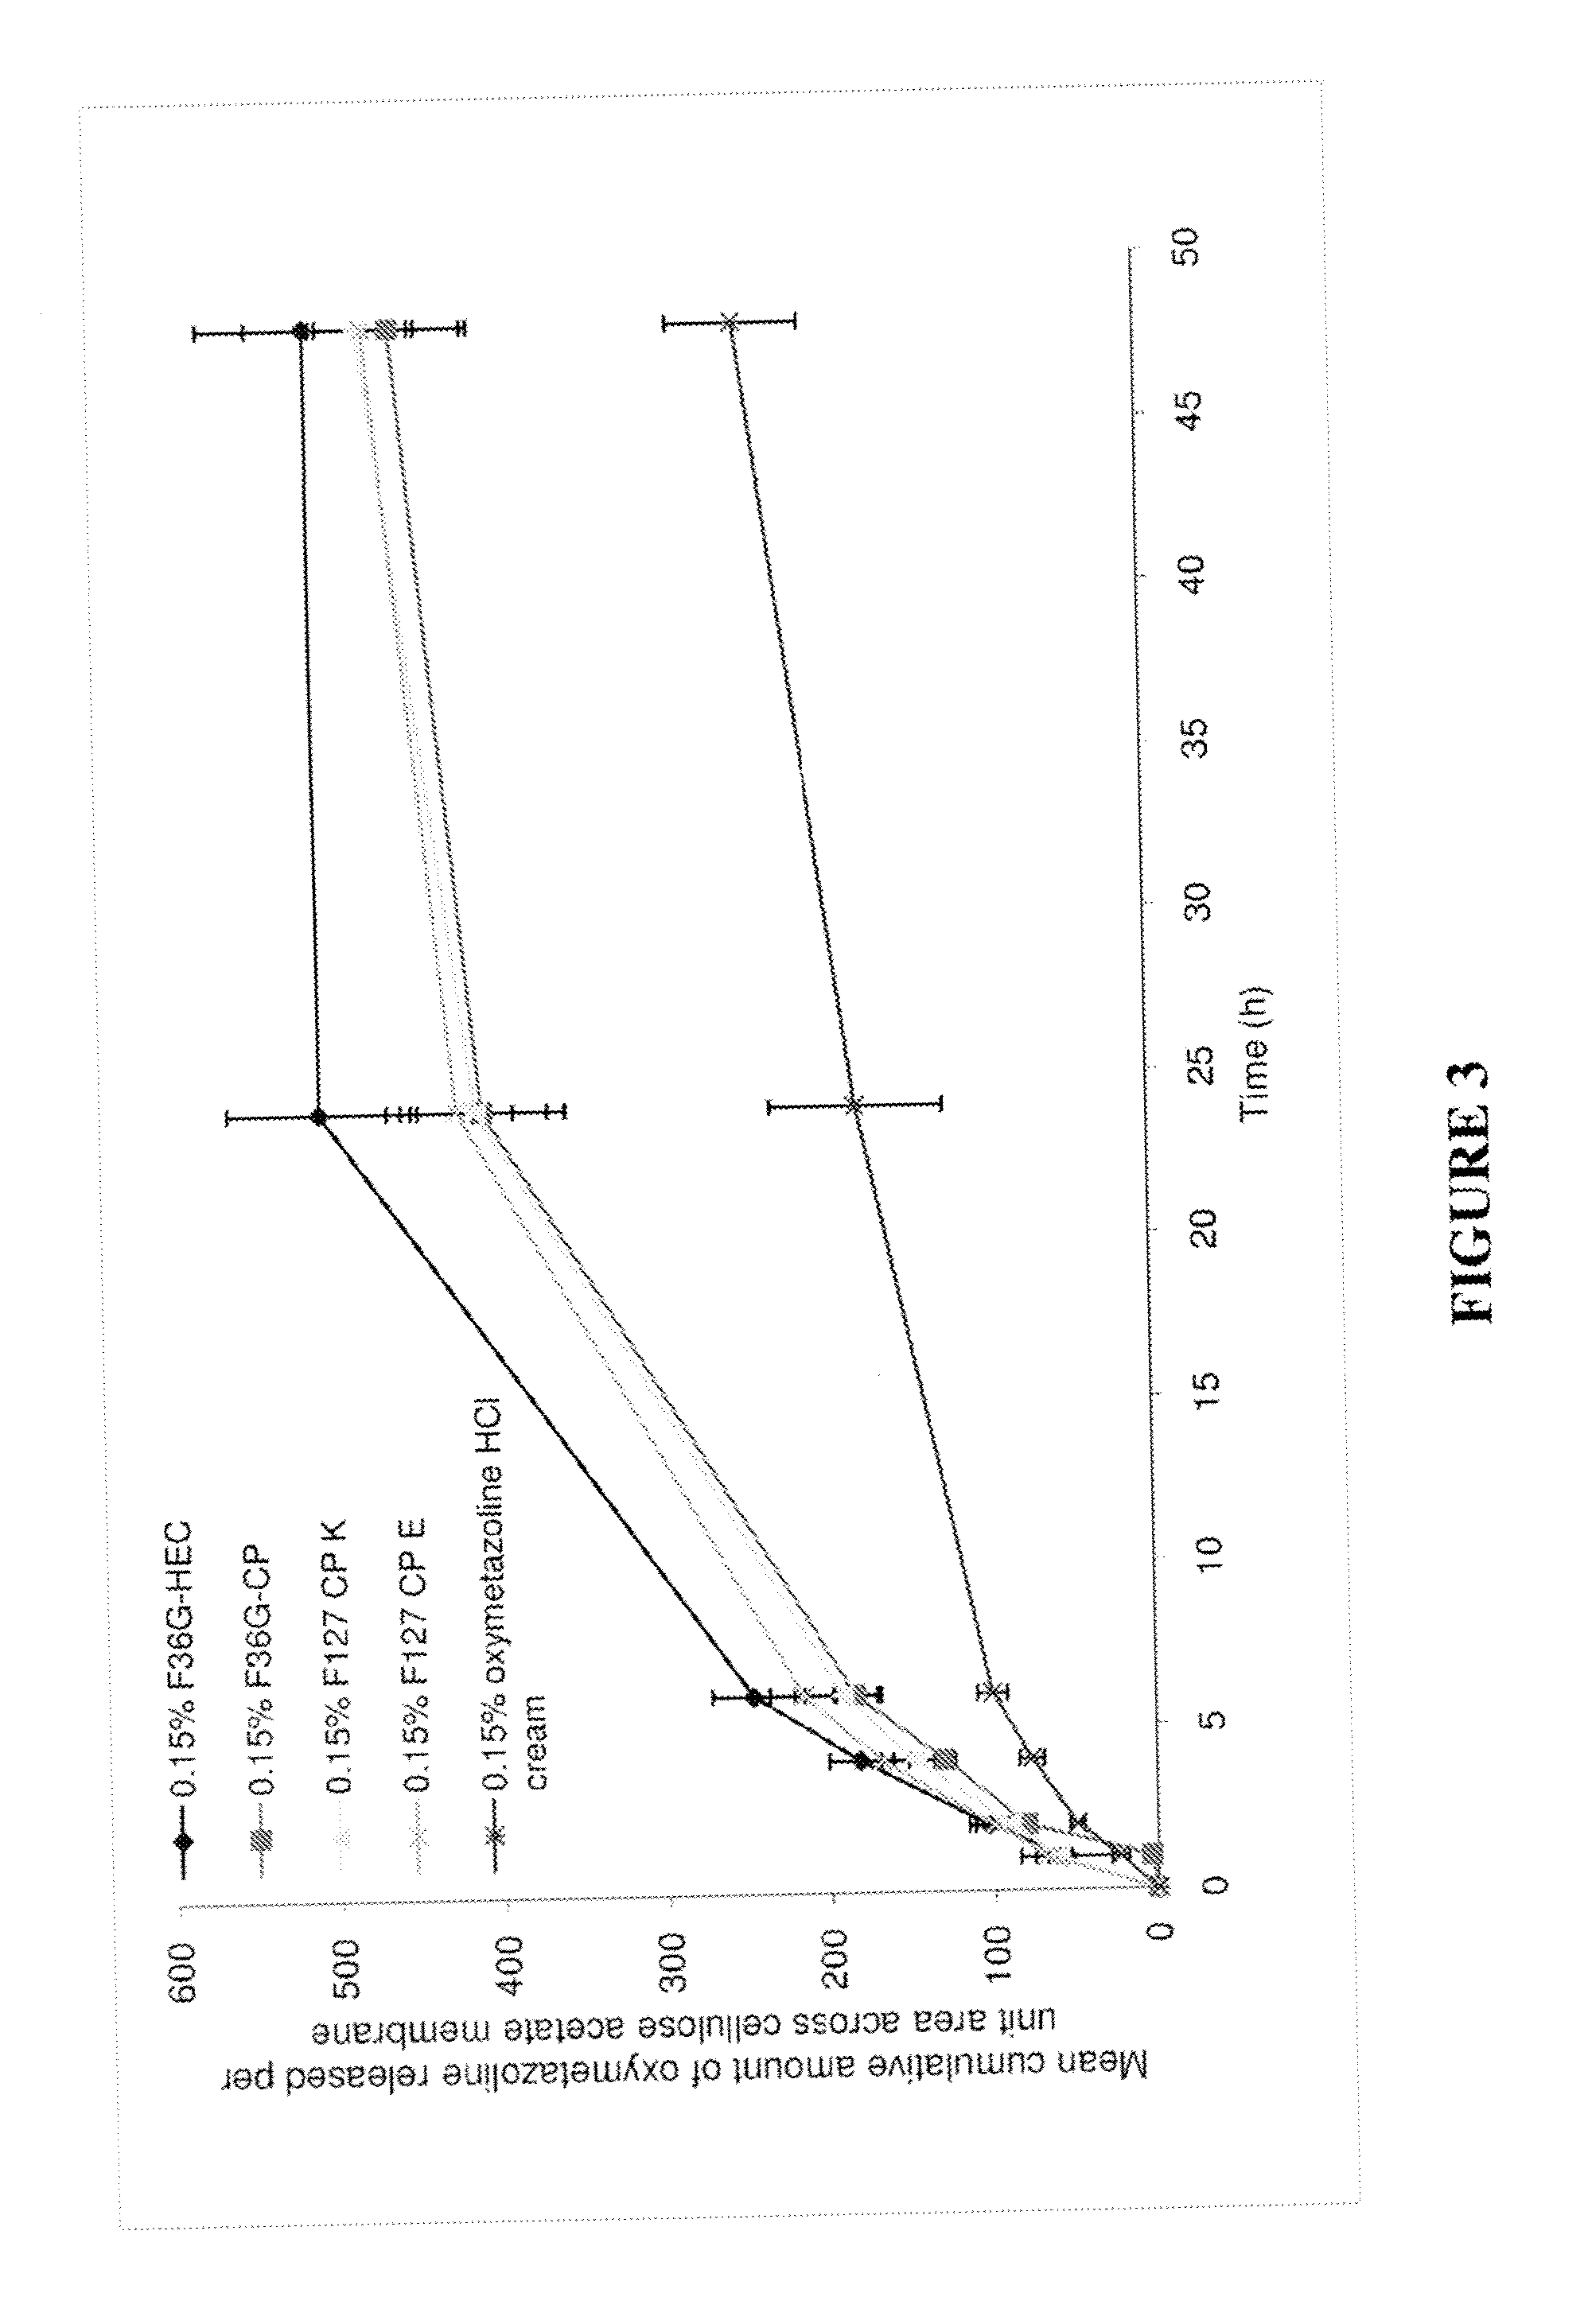 Gel compositions of oxymetazoline and methods of use